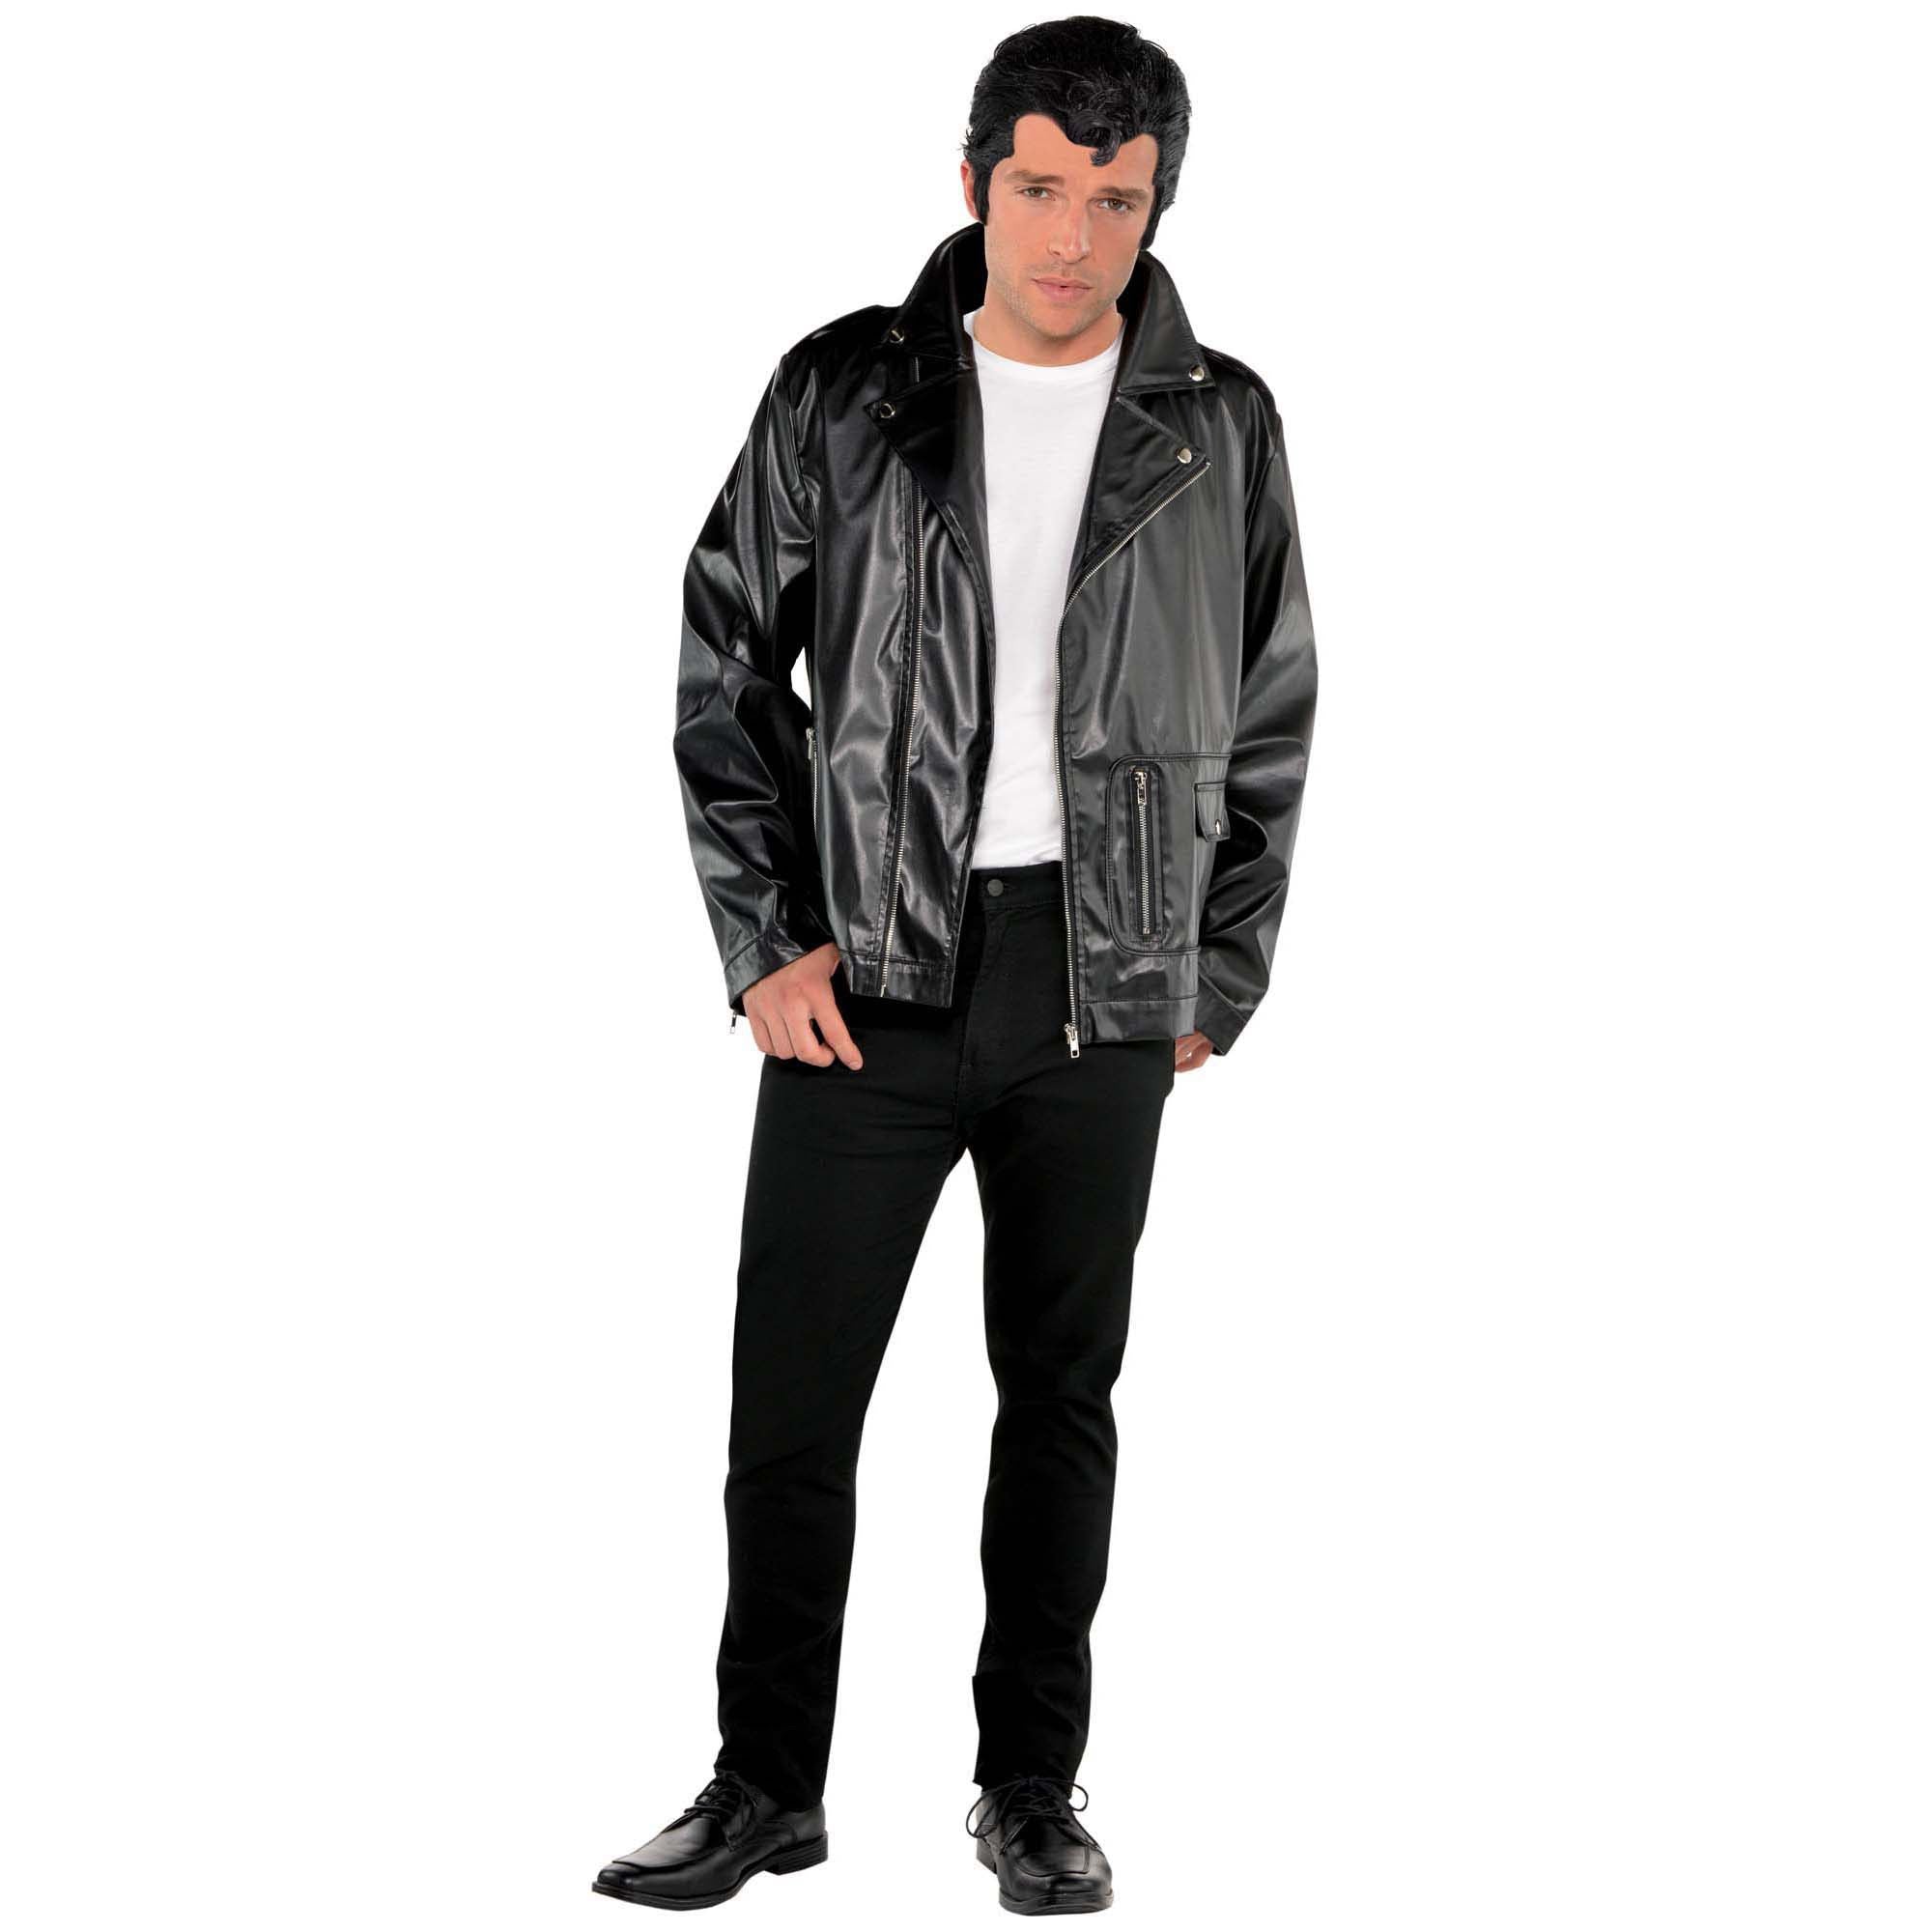 Amscan COSTUMES Grease T-Birds Jacket